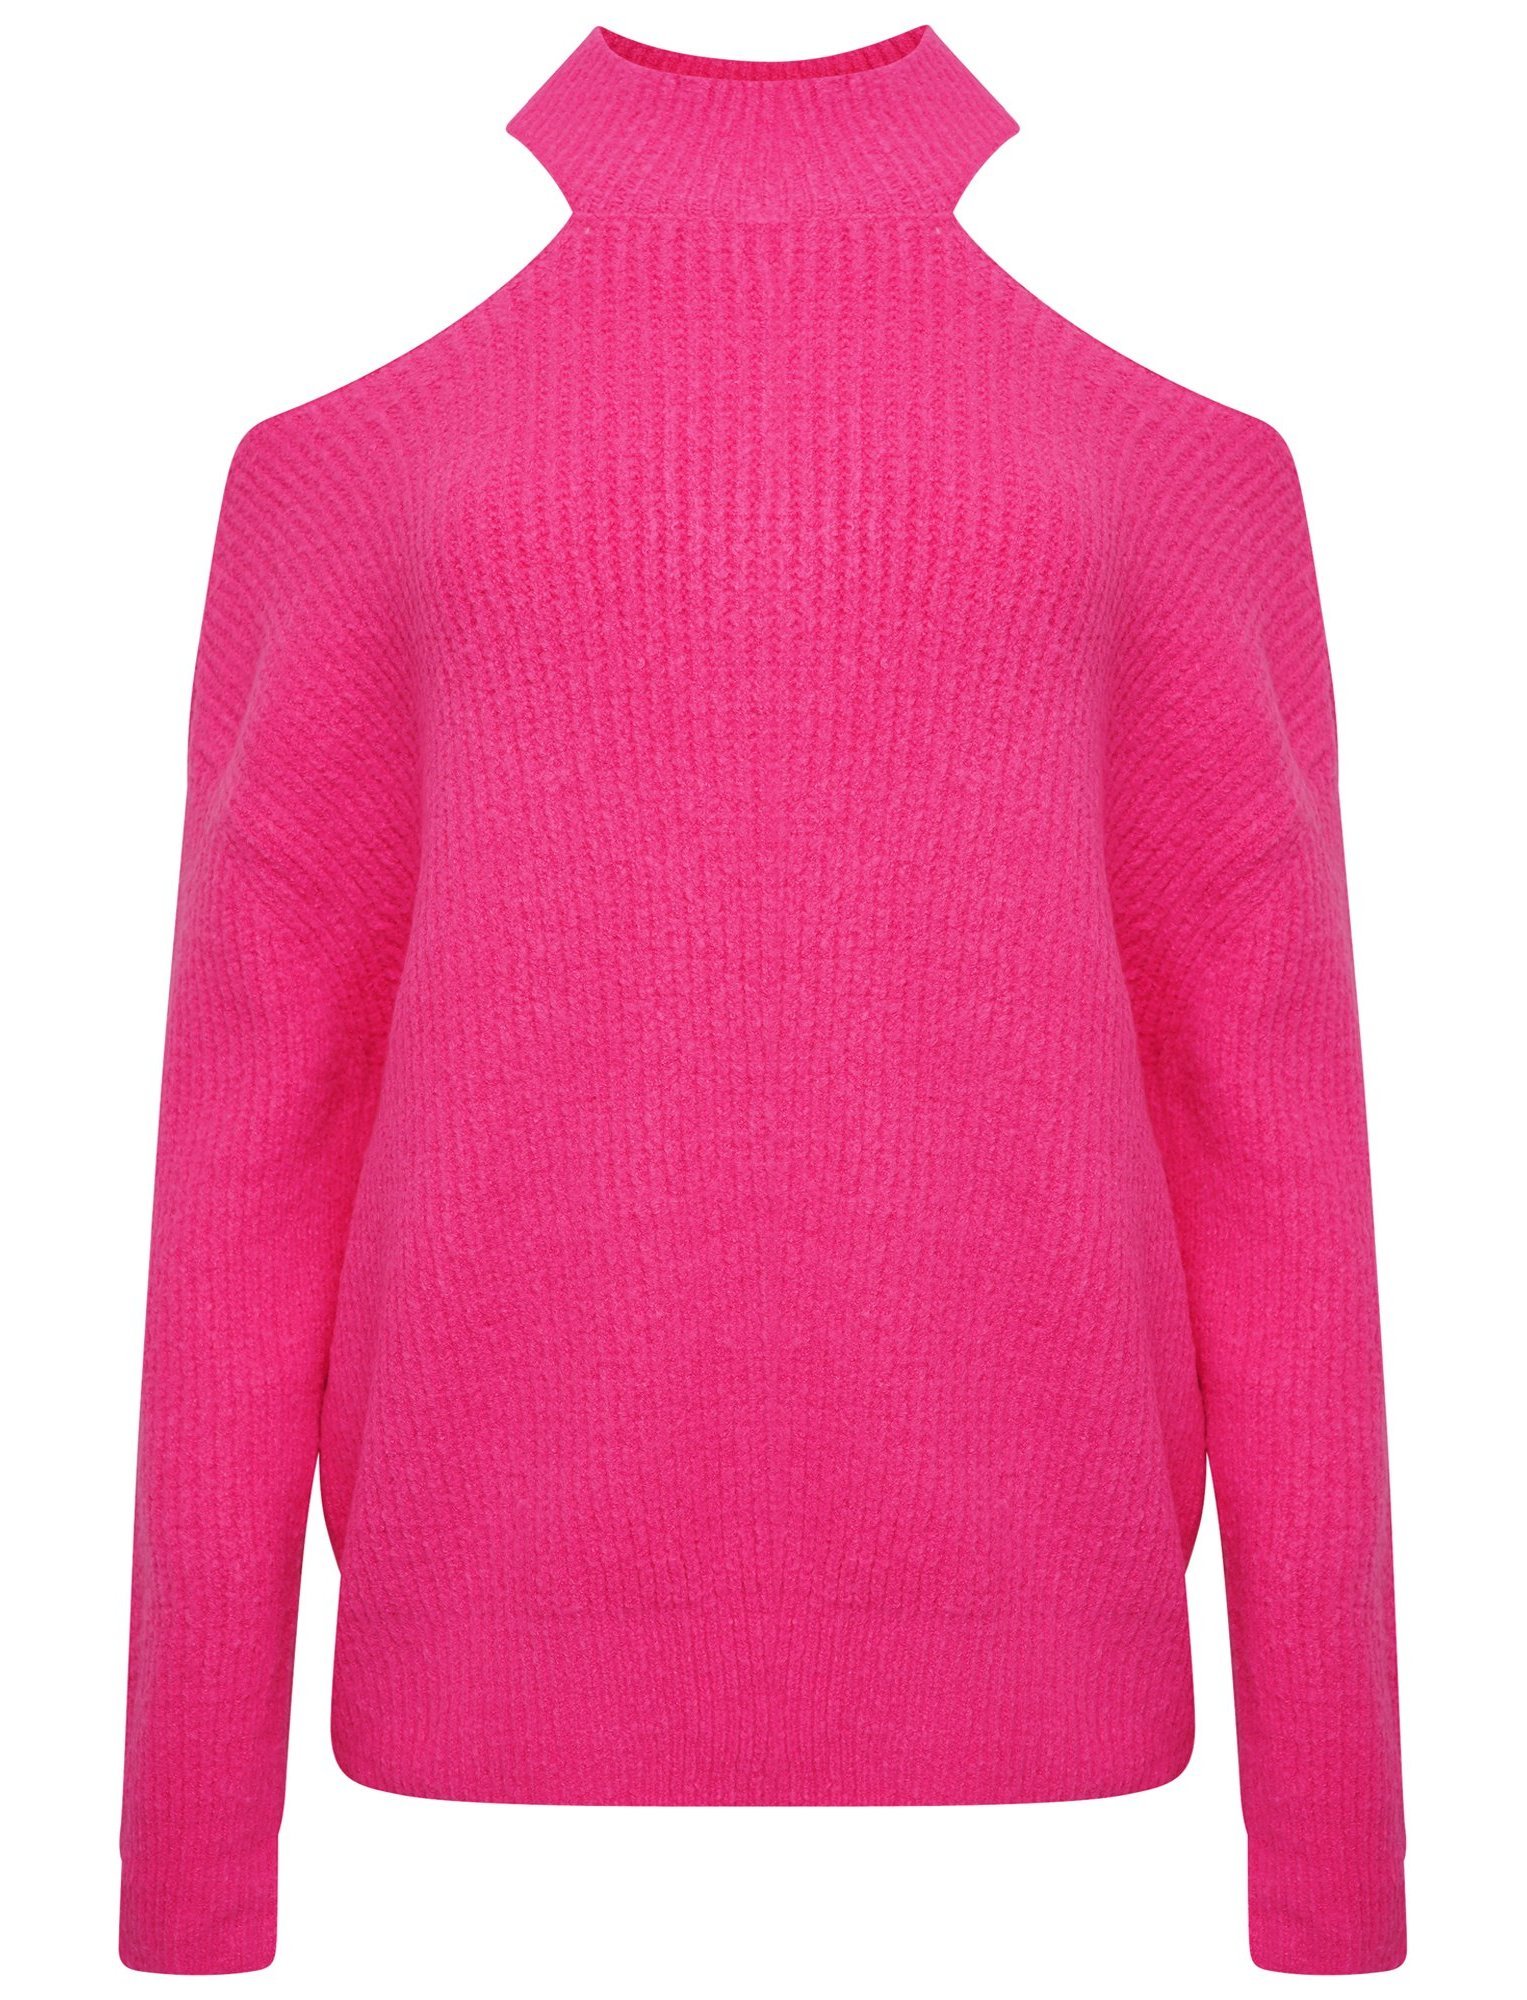 POLO NECK OVERSIZED CHUNKY KNIT JUMPER - FUCHSIA PINK - One Size